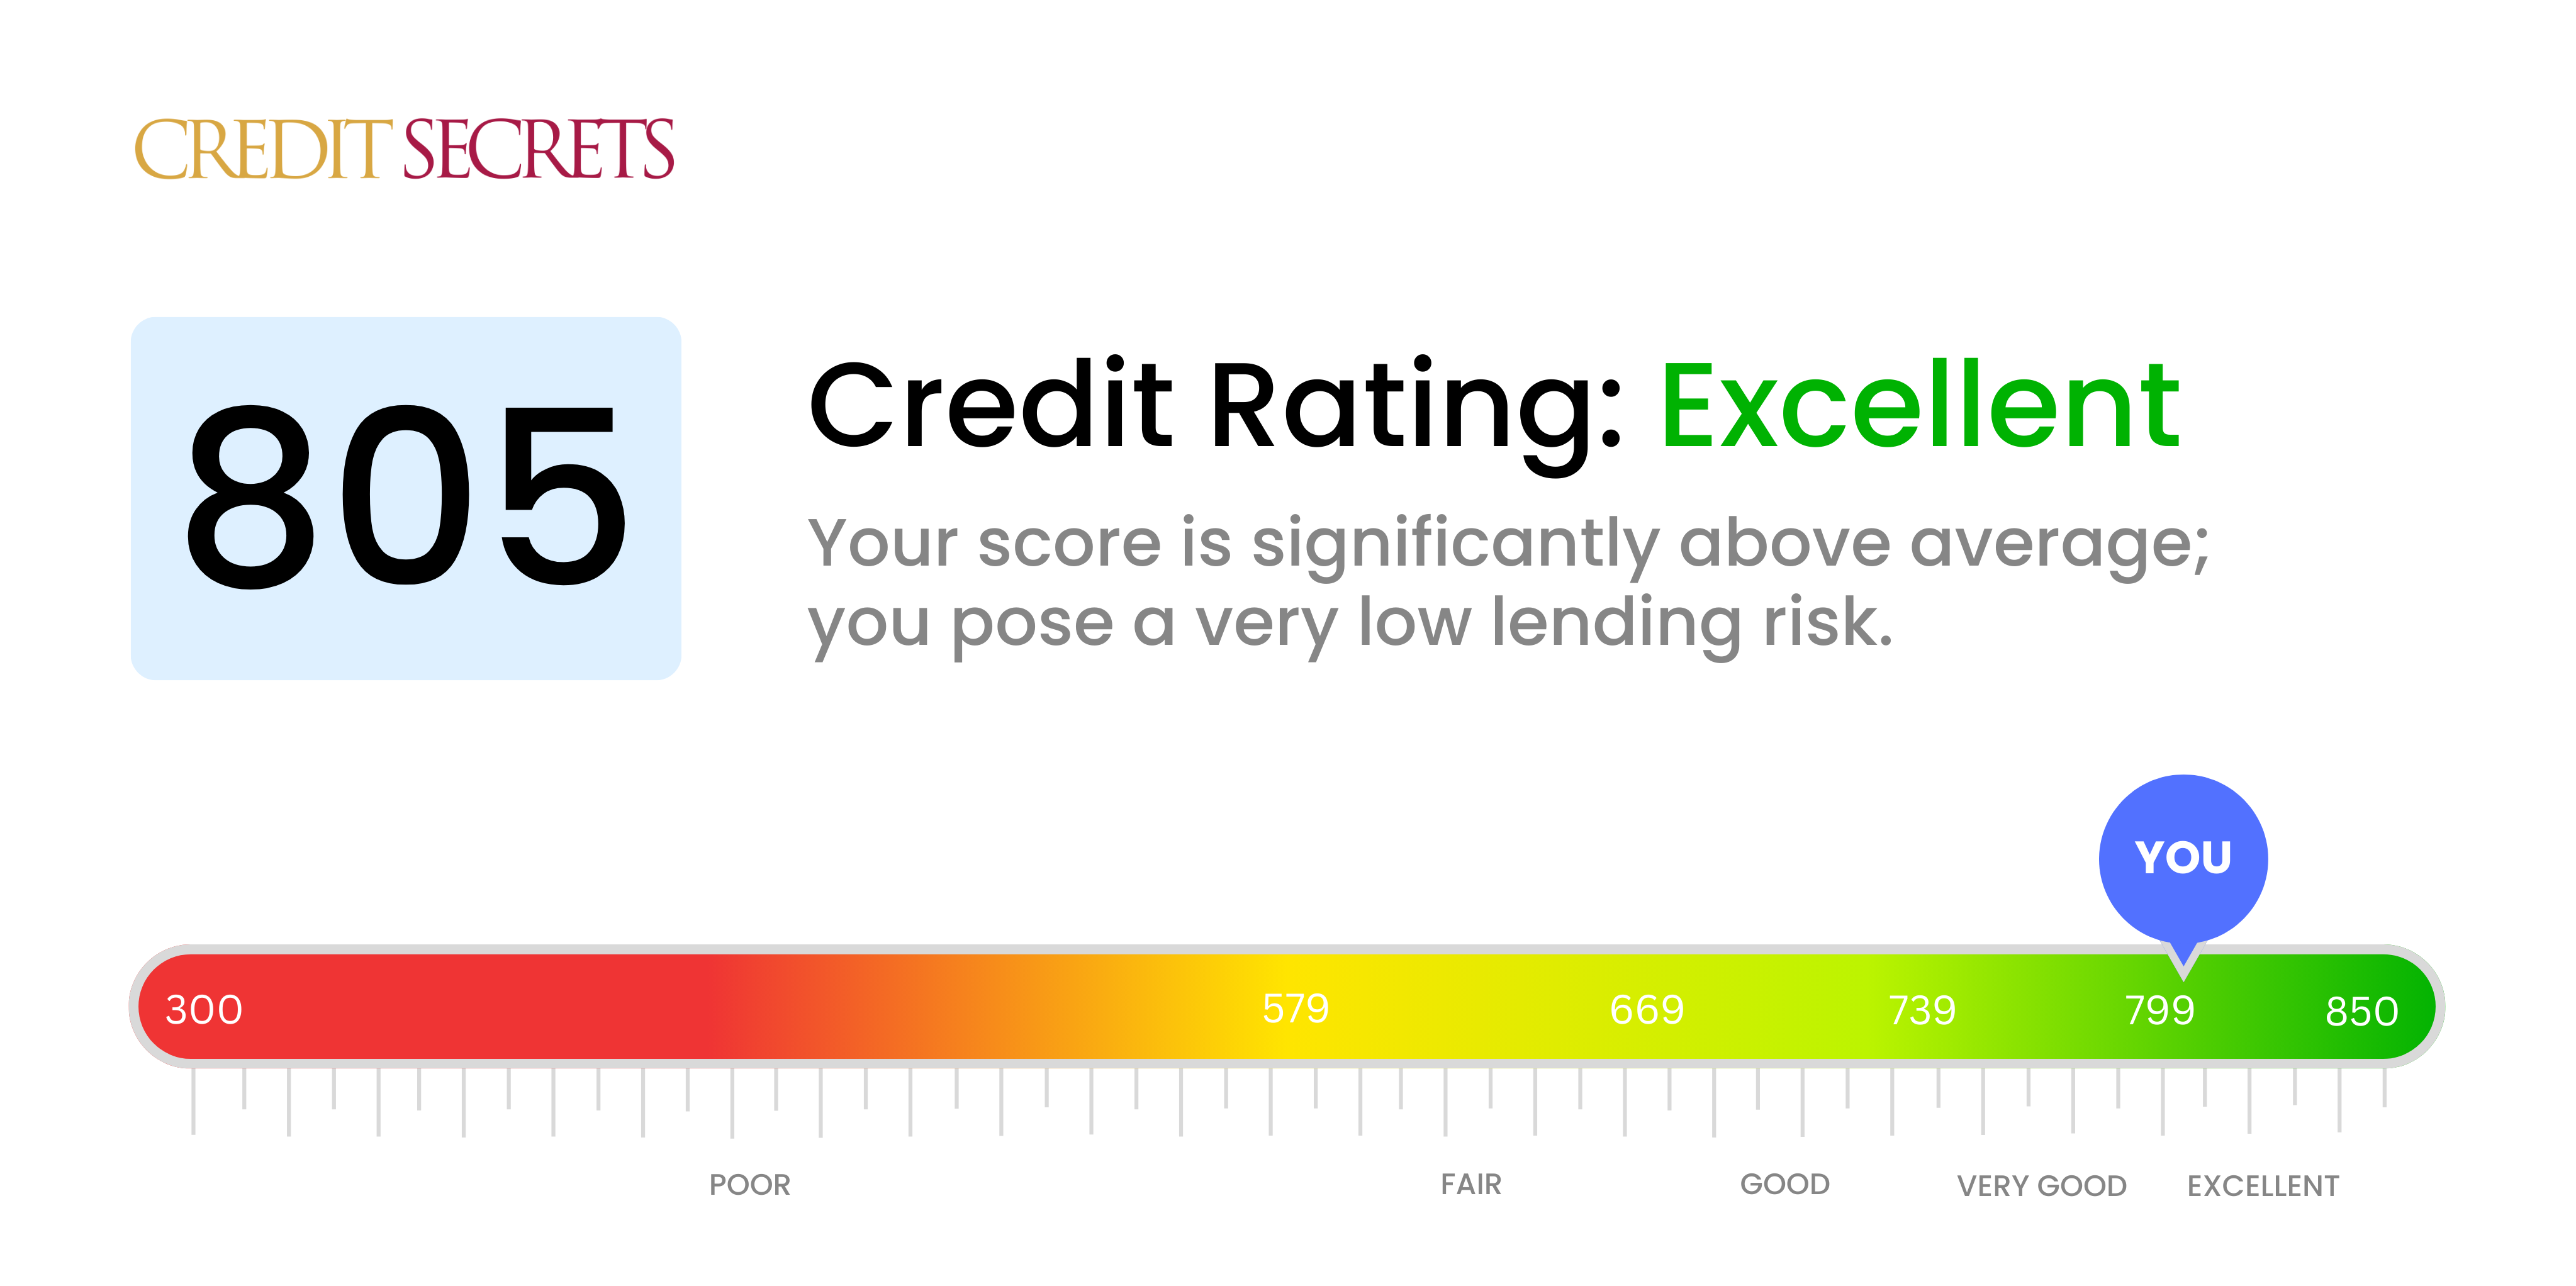 Is 805 a good credit score?